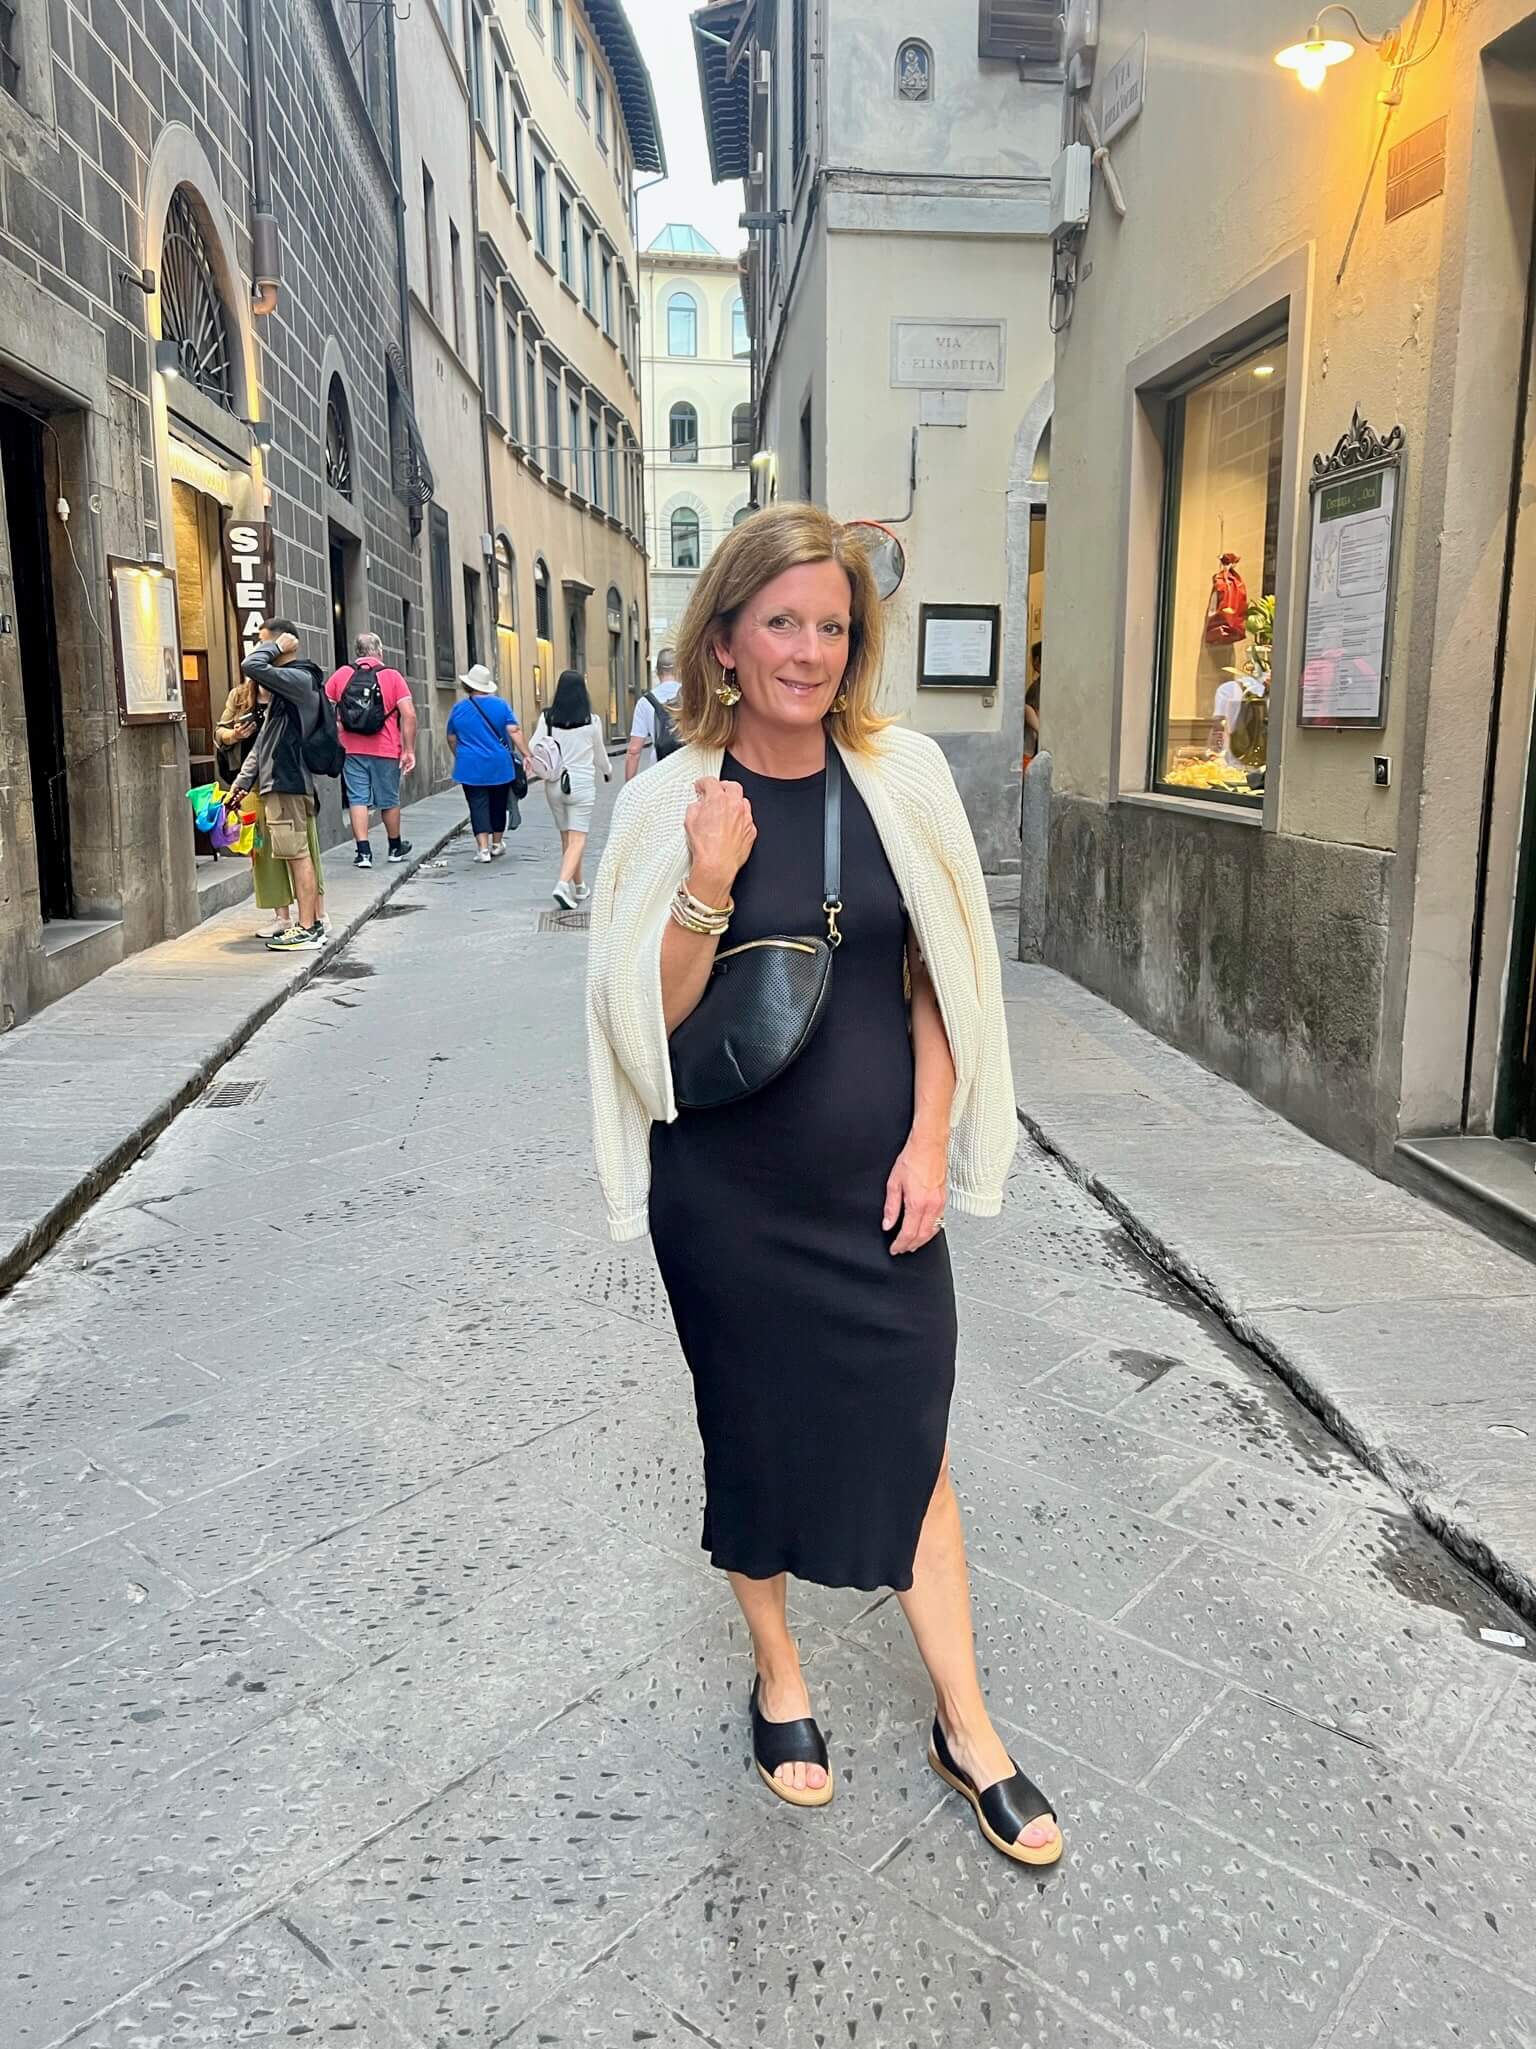 How To Pack For A European Vacation Elevated Cardigan & Black Midi Dress how to style a midi dress for summer the best sandals for lots of walking the most comfortable sandals for summer high quality summer sandals how to style a cardigan this summer